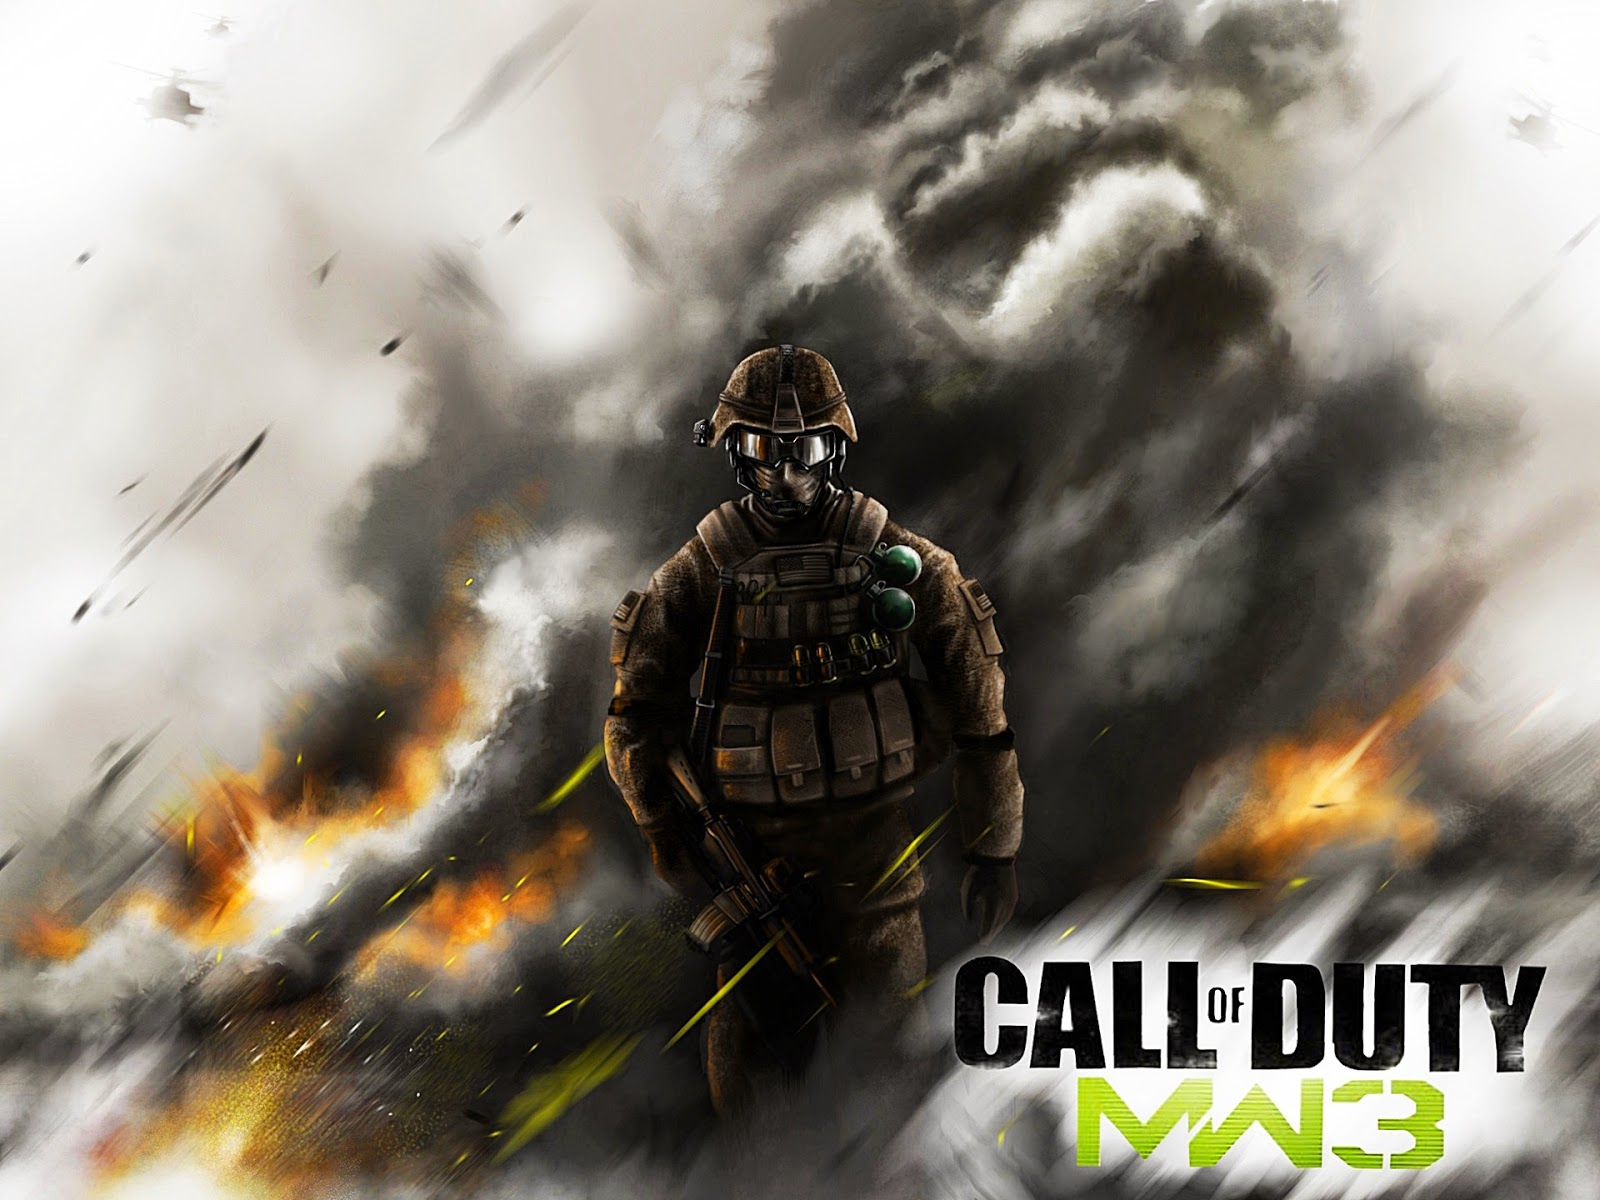 Cod mw3 for pc download torrent windows 7